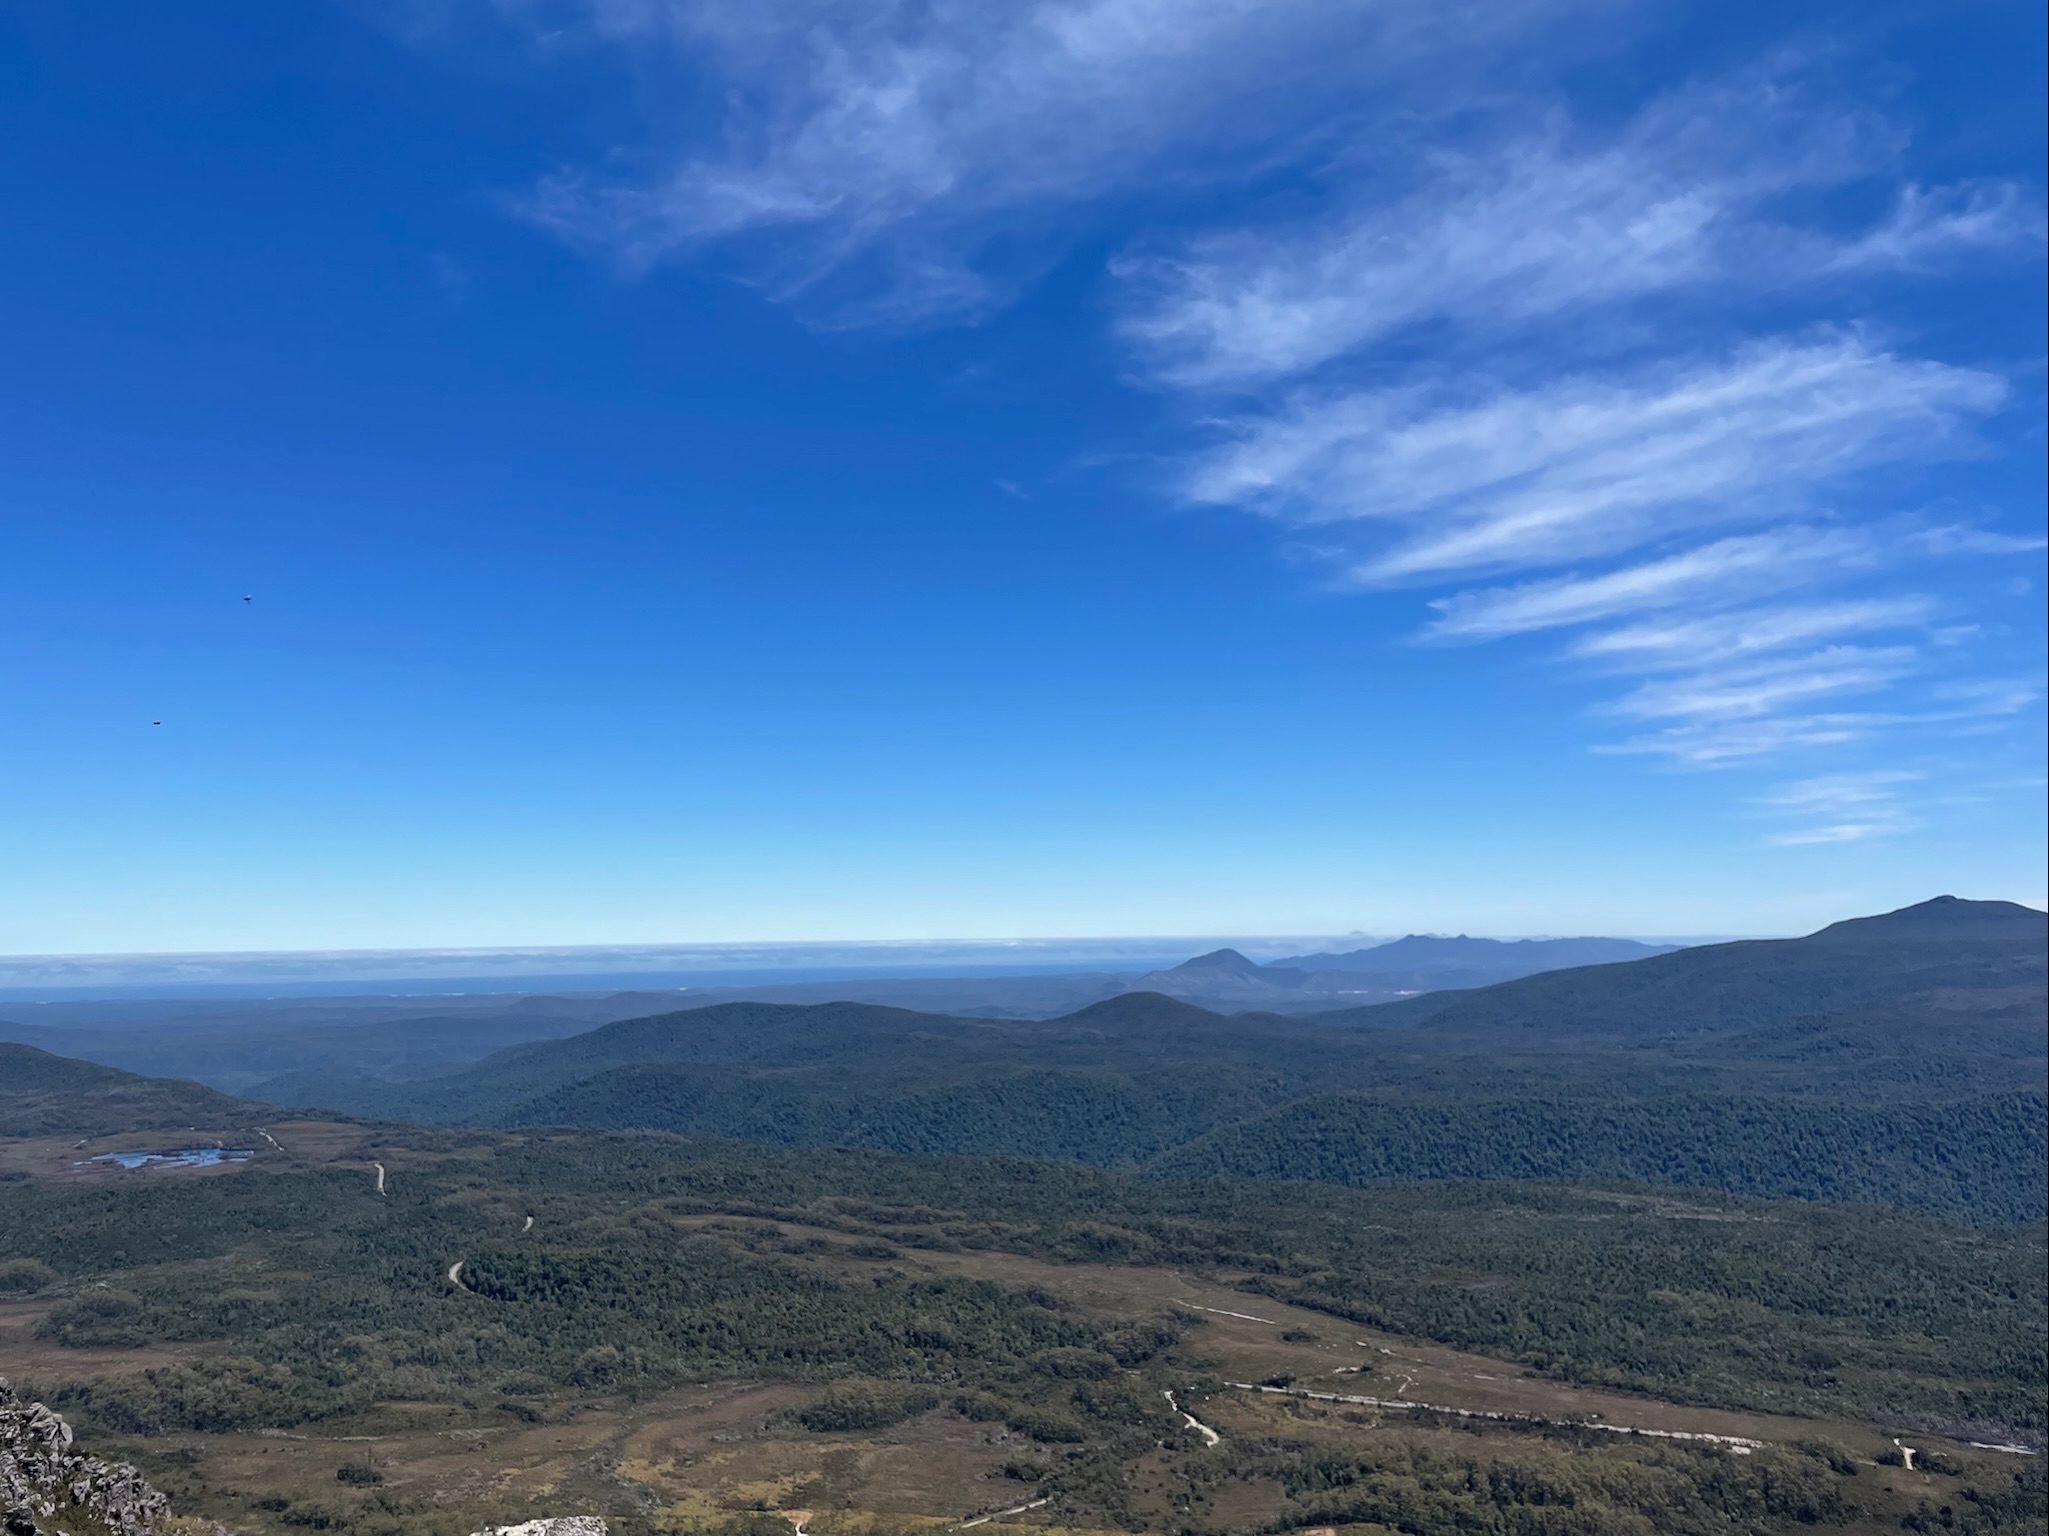 A panorama from the top of a mountain